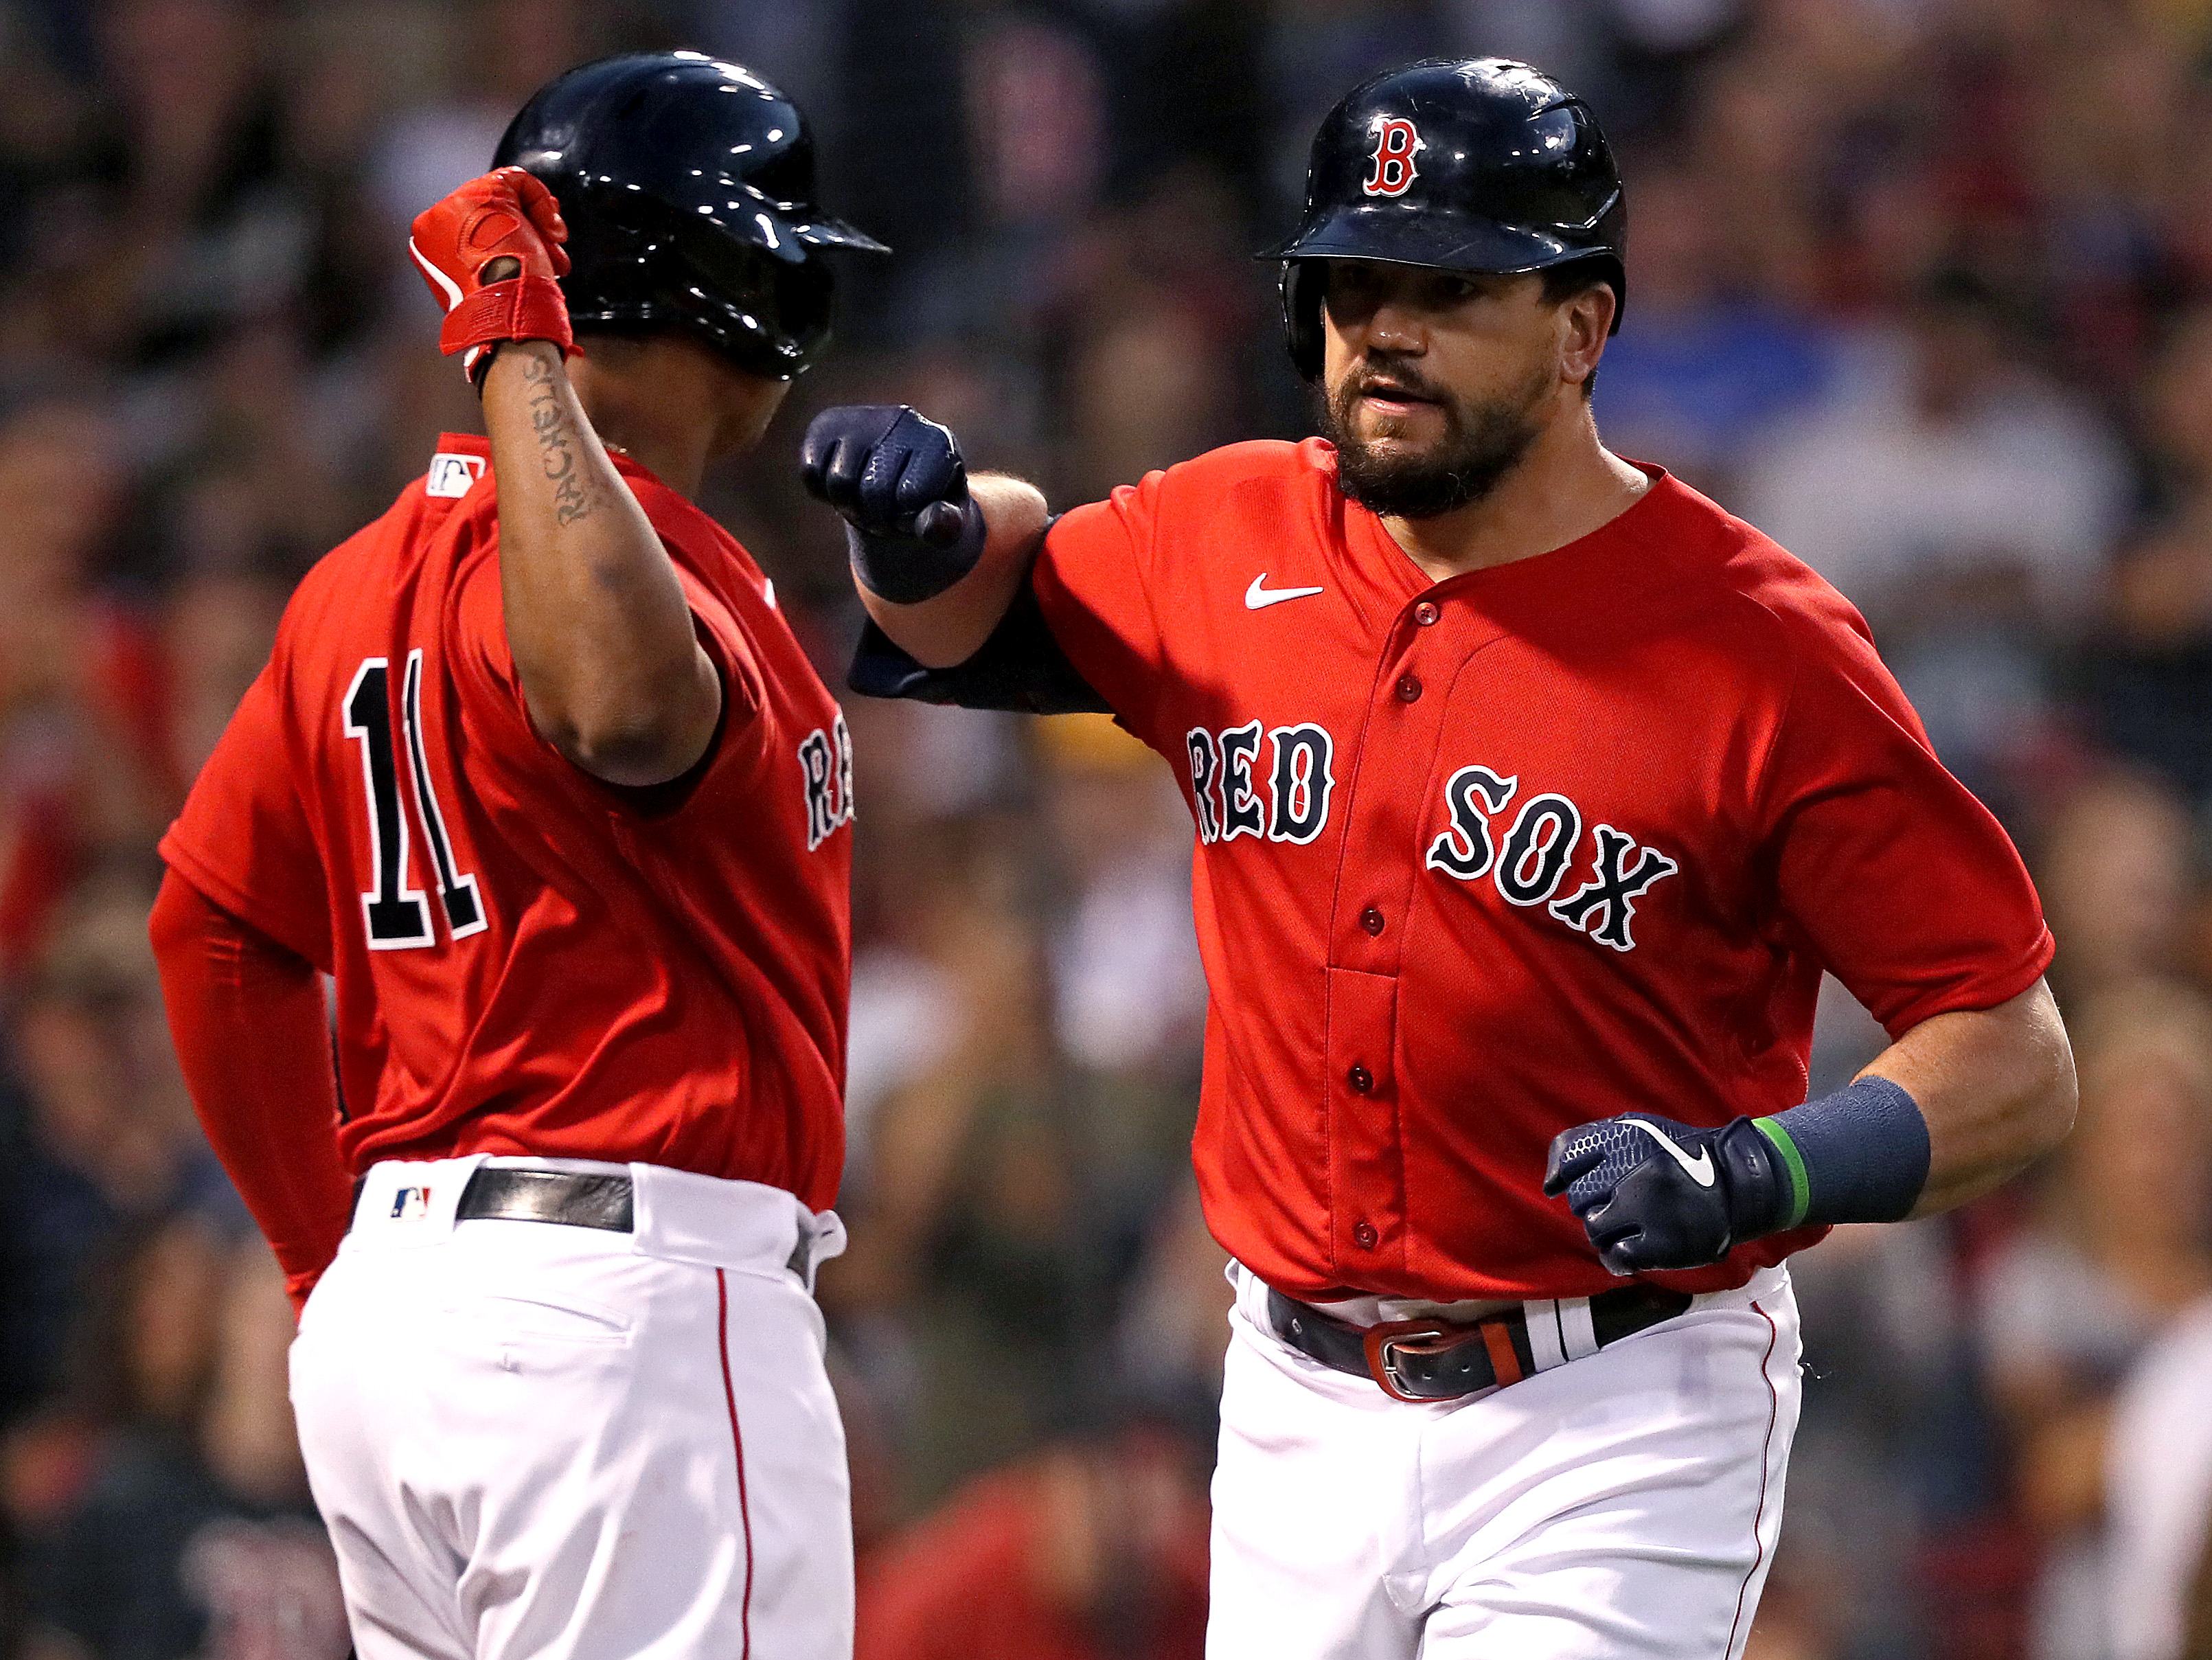 Kyle Schwarber leads Boston Red Sox to late win over Cleveland